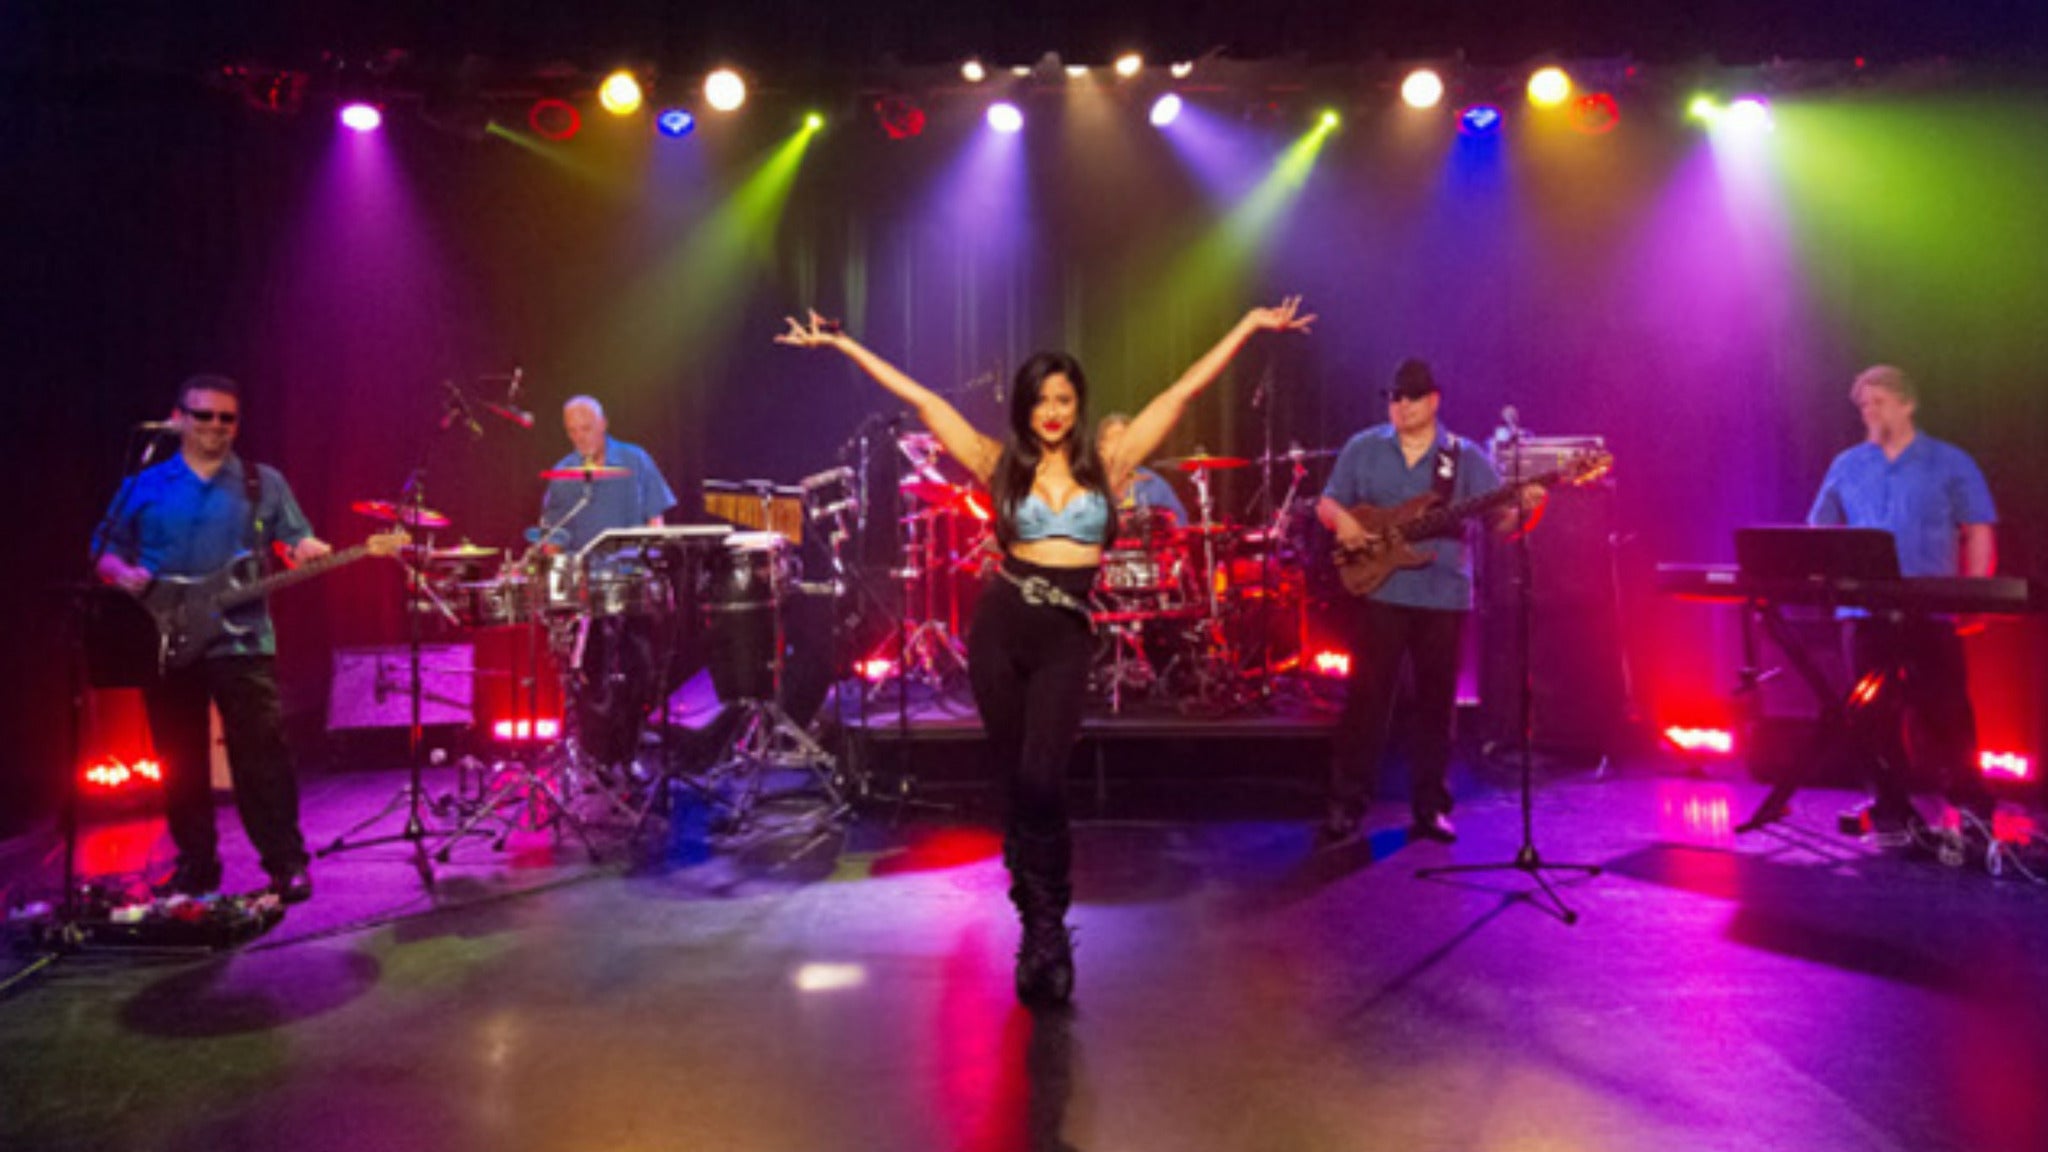 Genessa & The Selena Experience - A Tribute to Selena in New York City event information